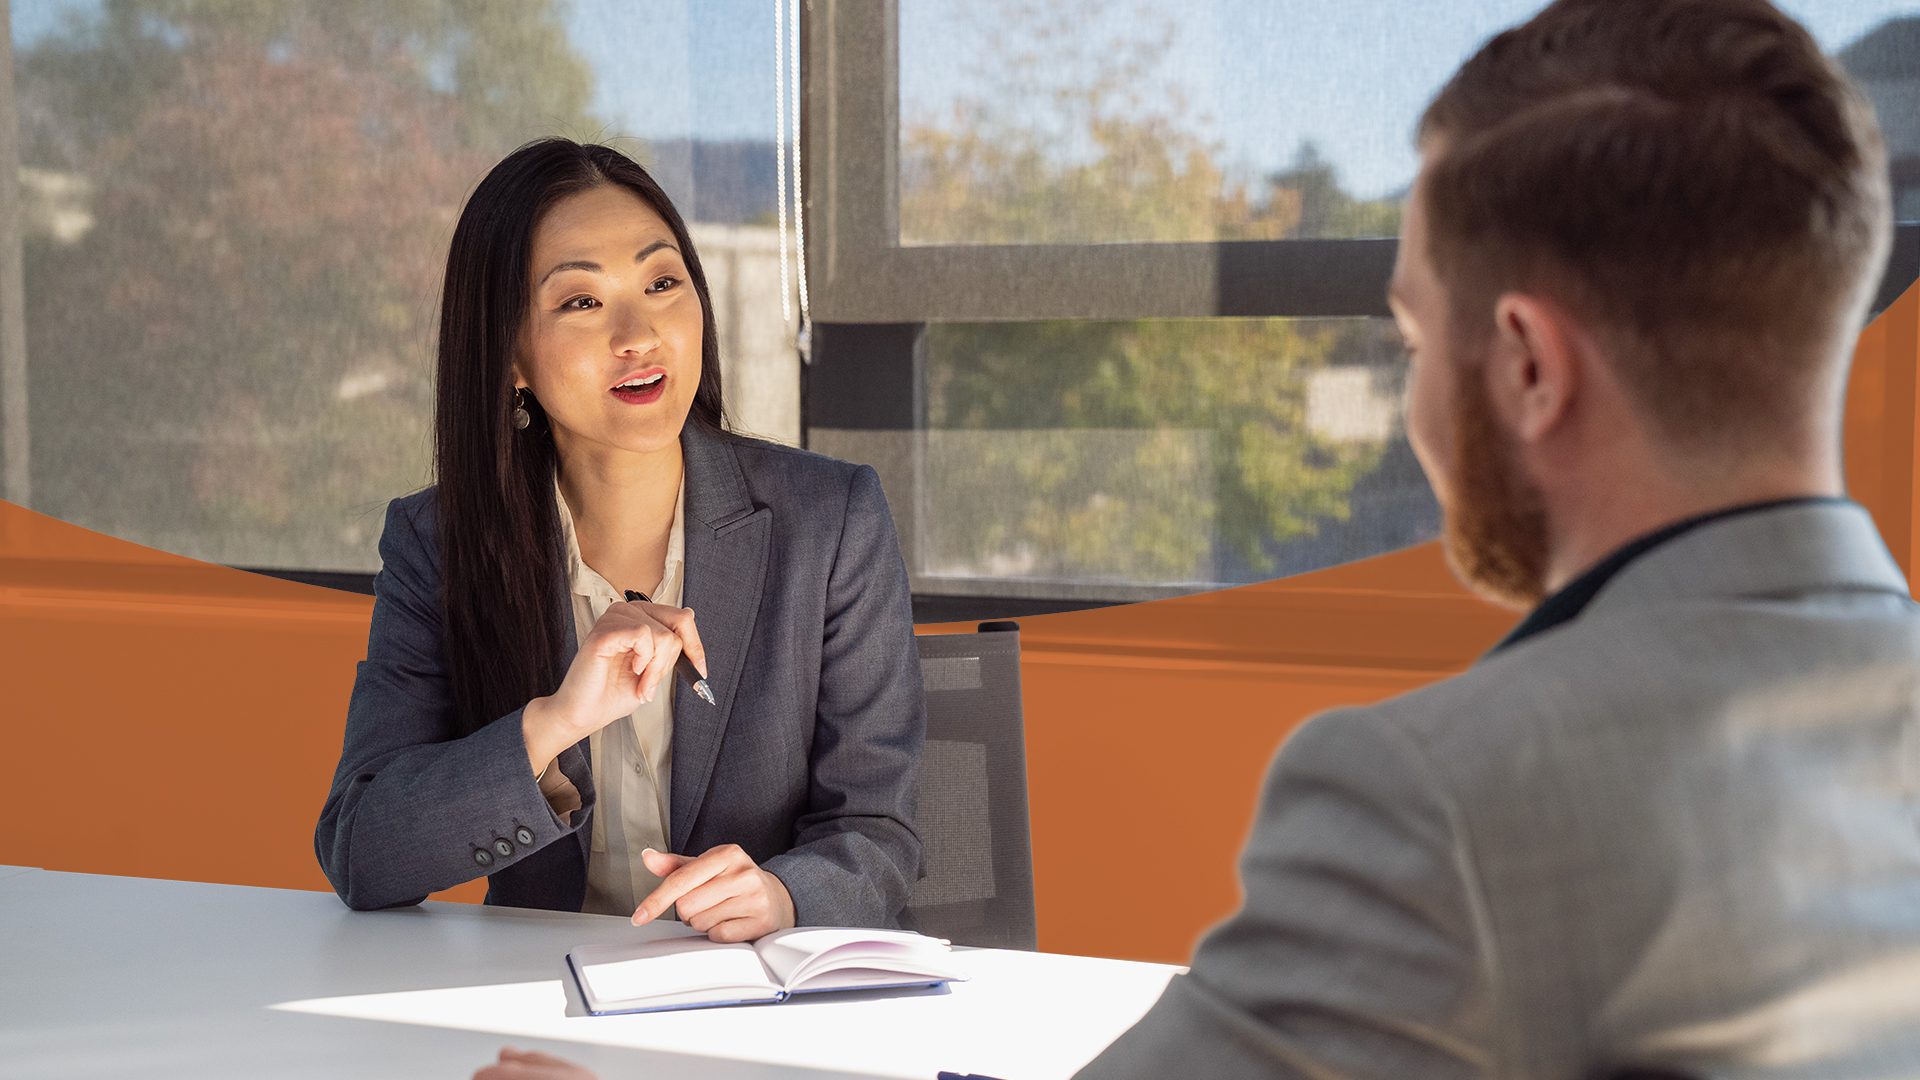 Here are the top 5 questions and answers to ace an interview.